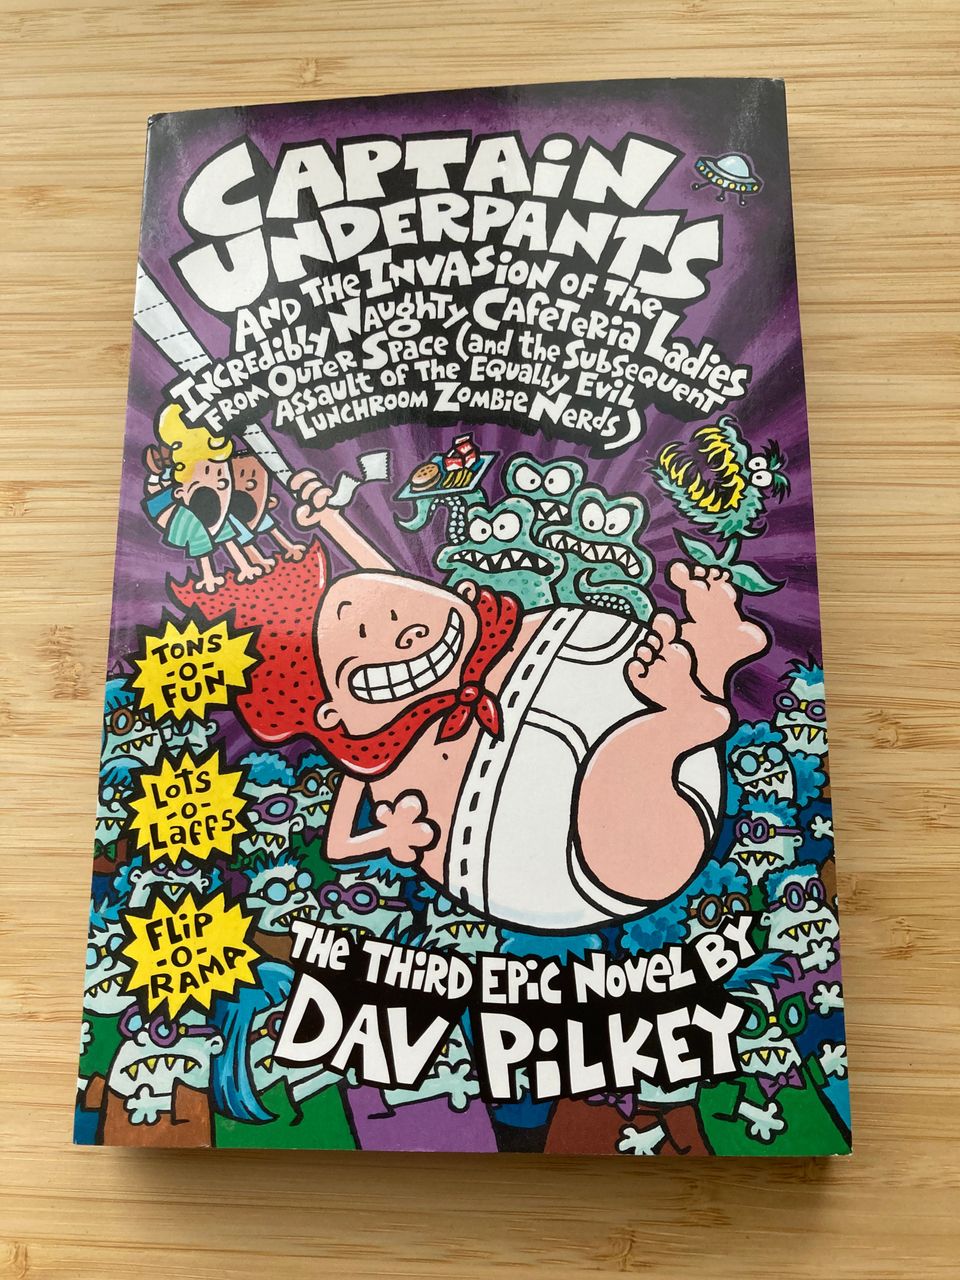 Captain Underpants and the Invasion of the Terribly Naughty Cafeteria Ladies